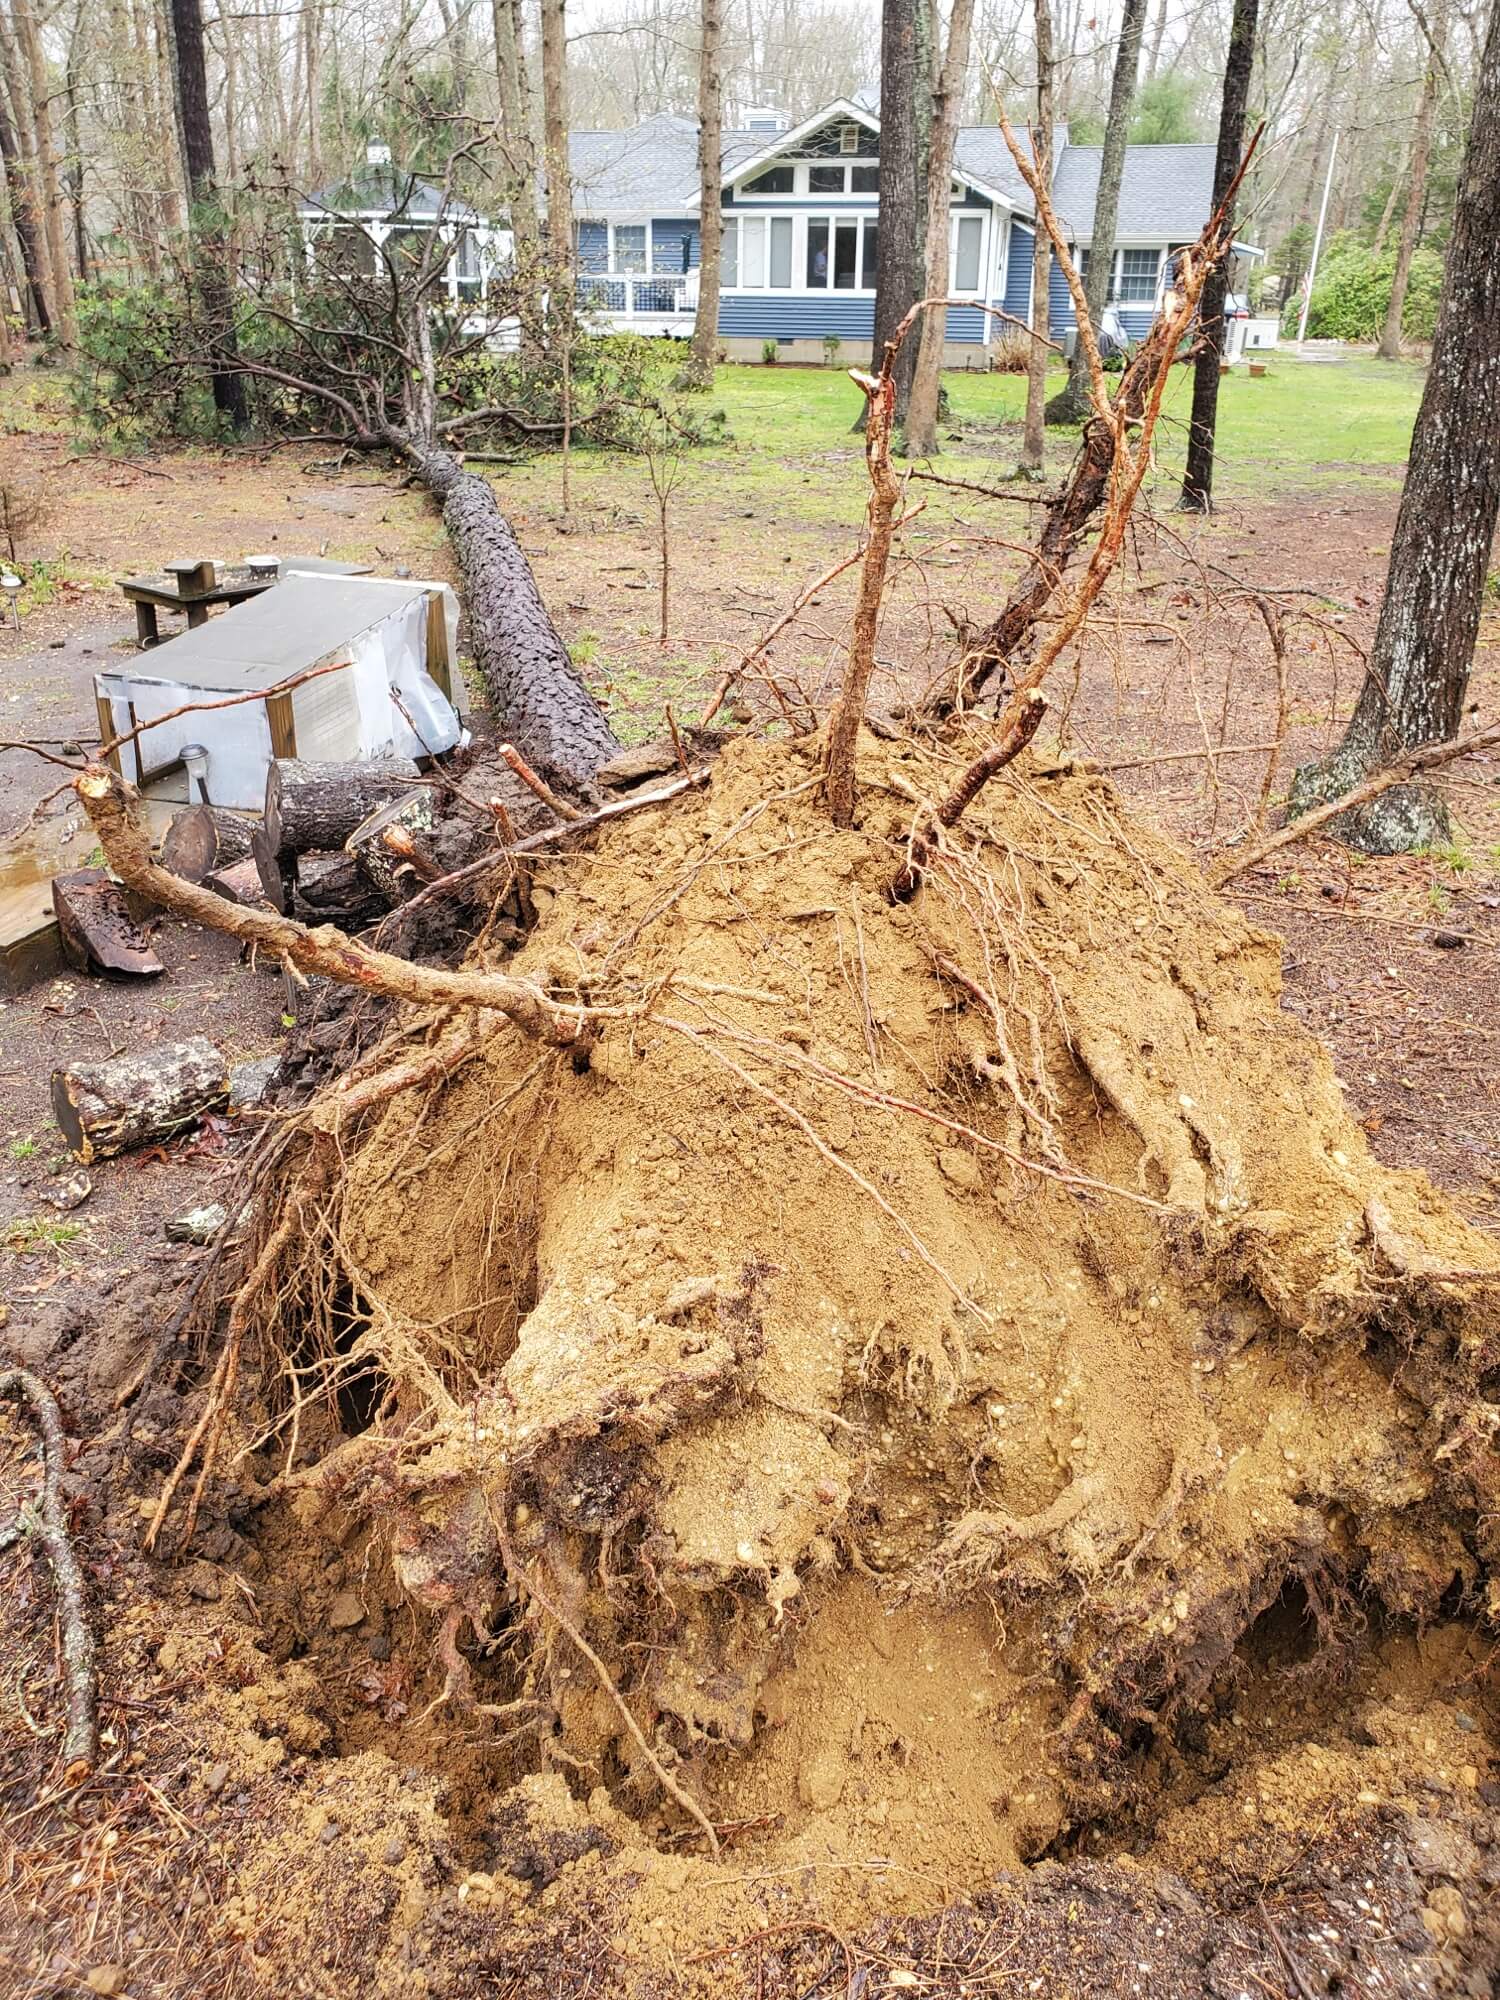 A 65-foot pine tree in Dennisville was uprooted April 13